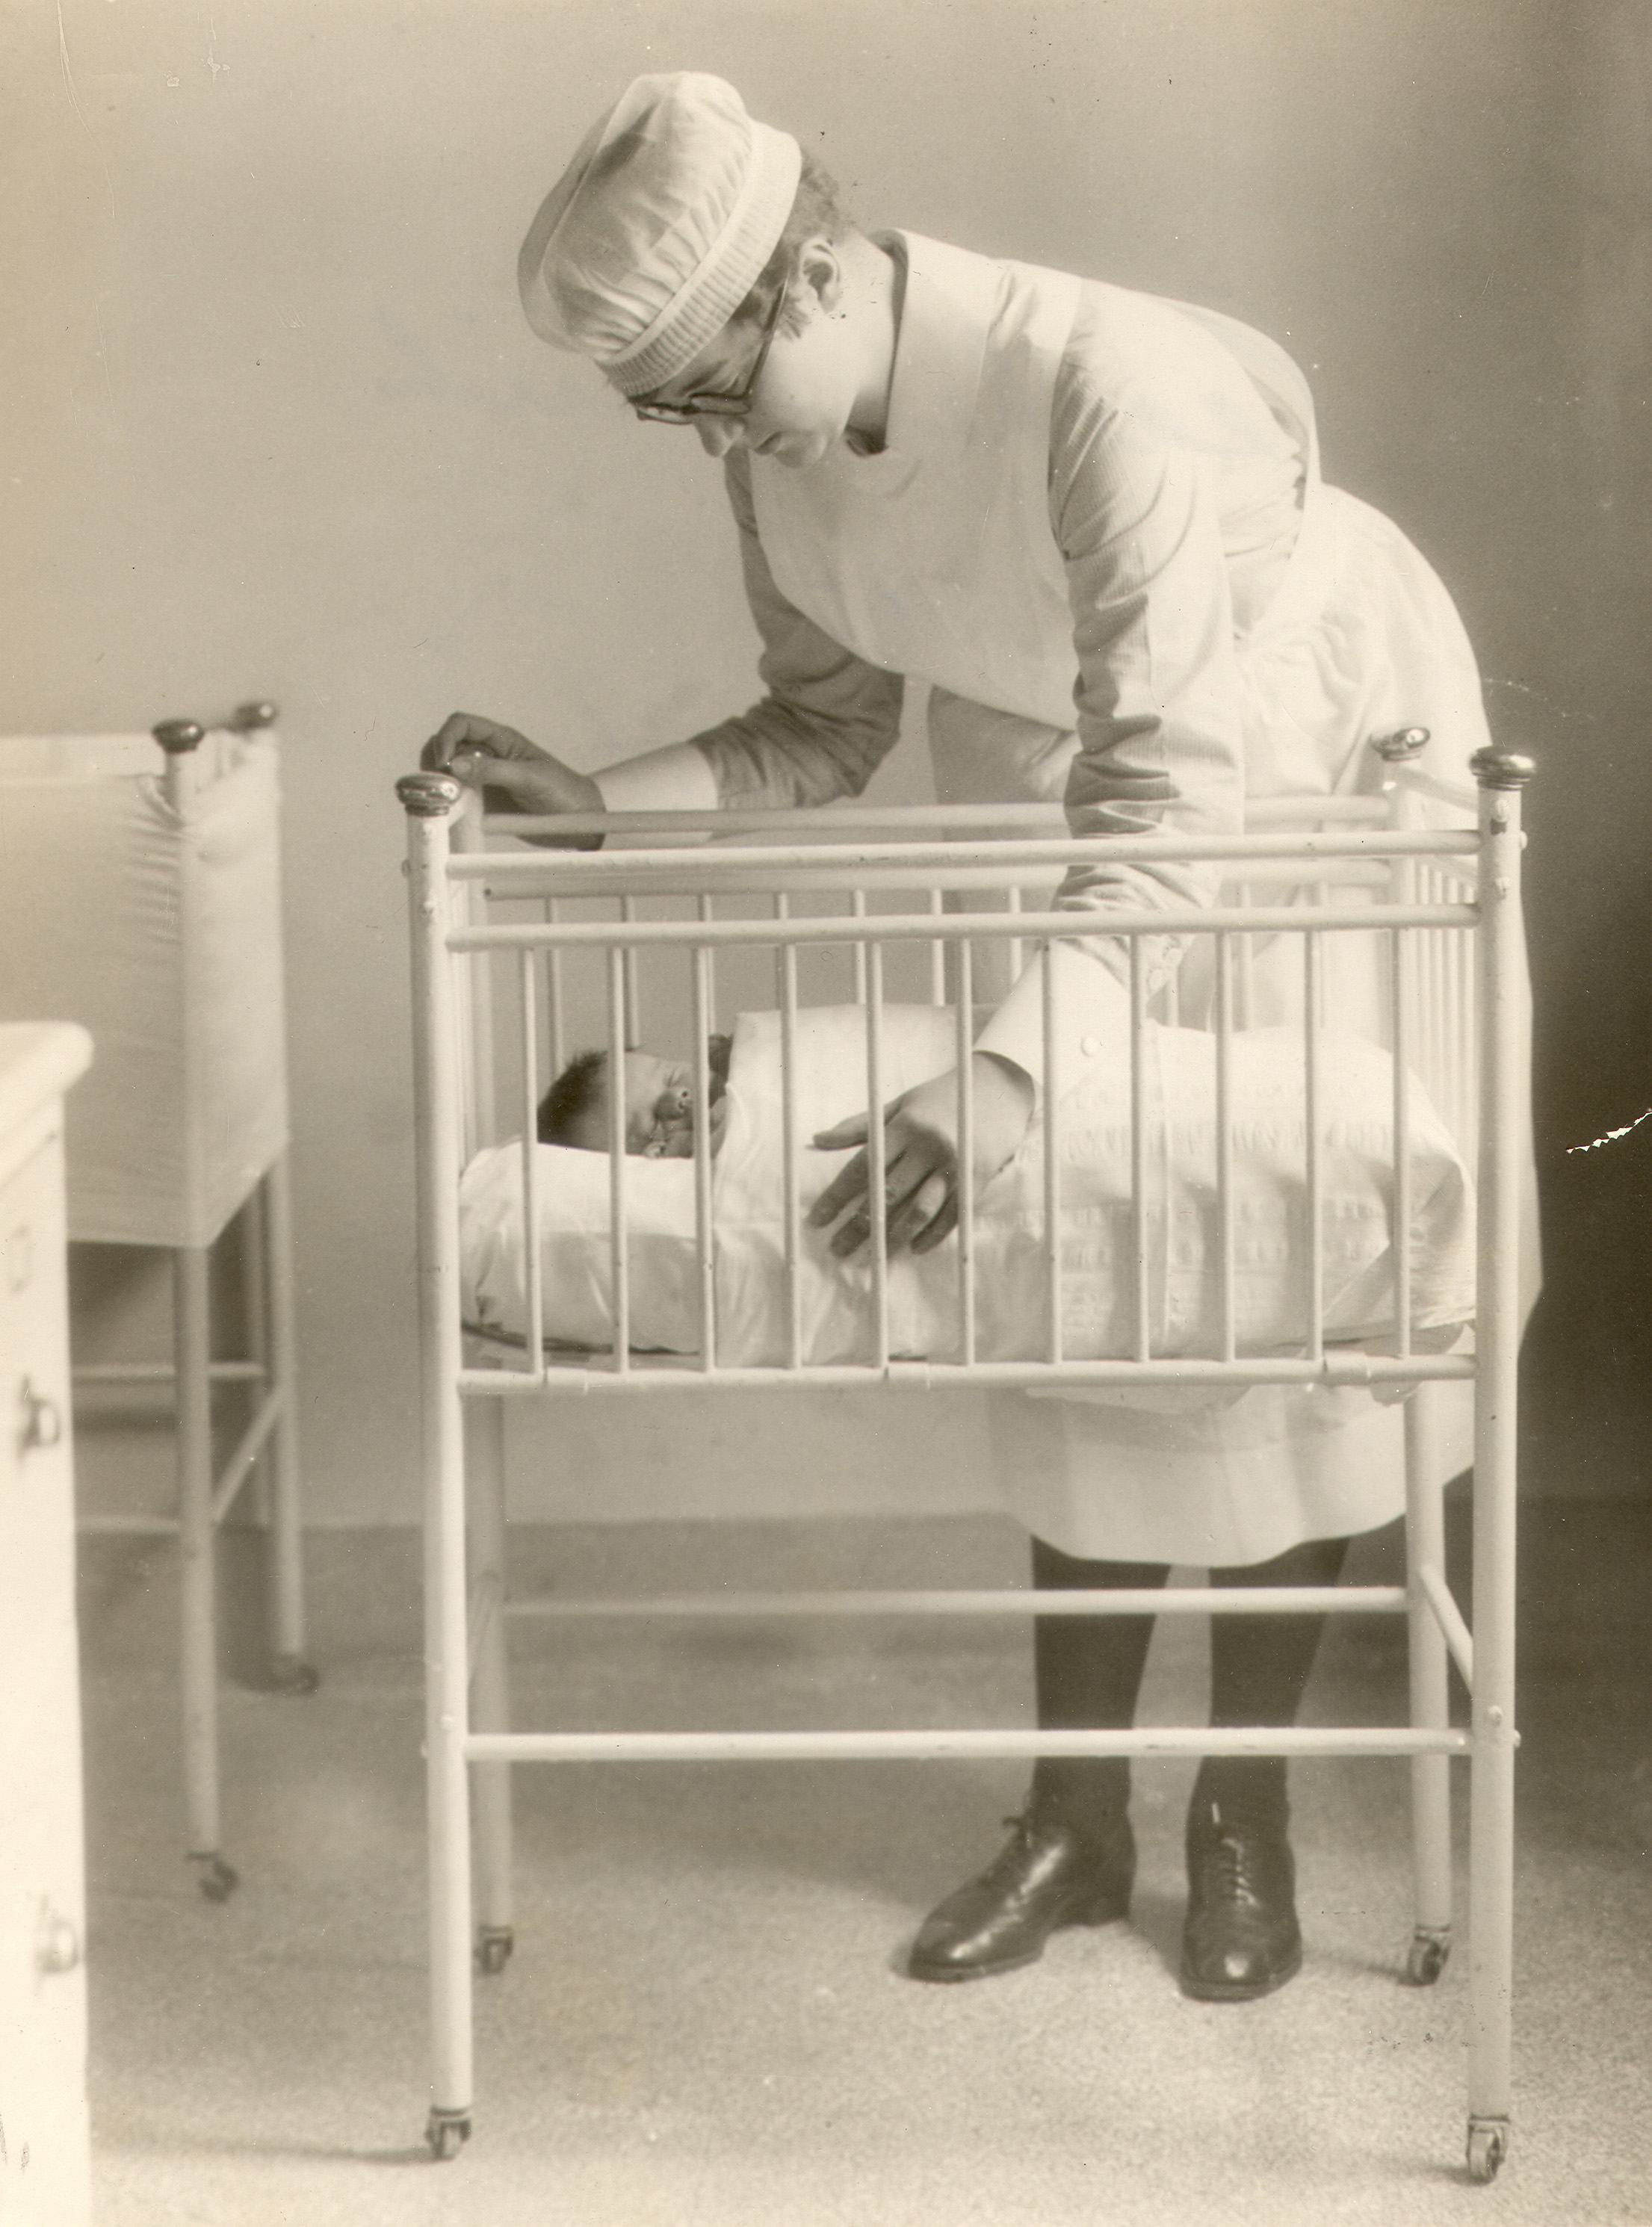 A young woman leans over a crib with a baby in it. She is wearing a nurses' uniform.